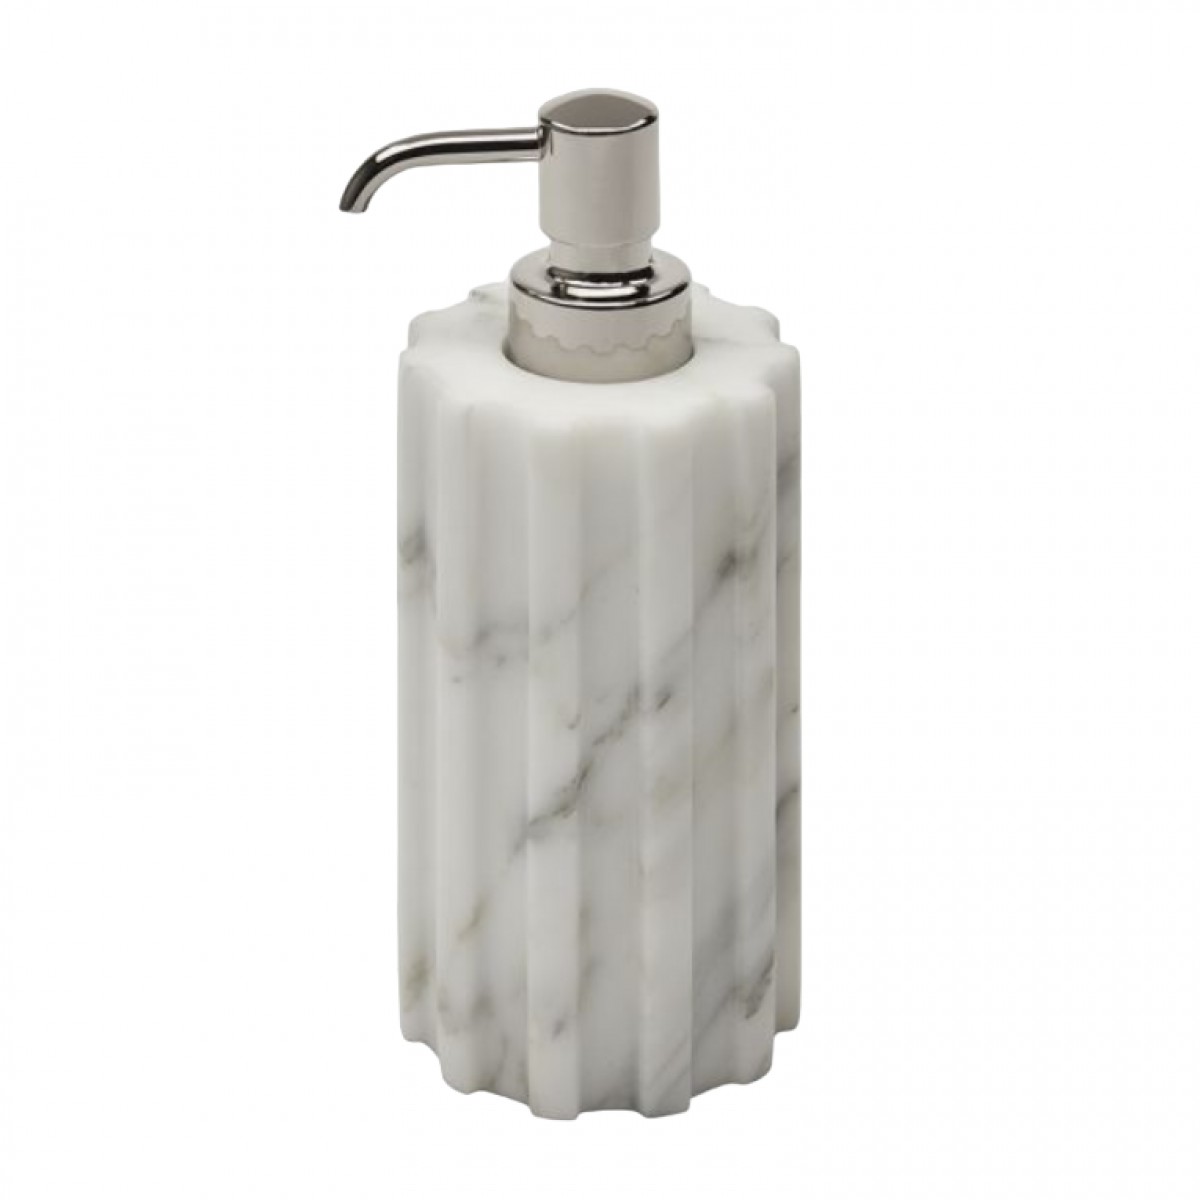 Andrian Round Soap Dispenser with Metal Top